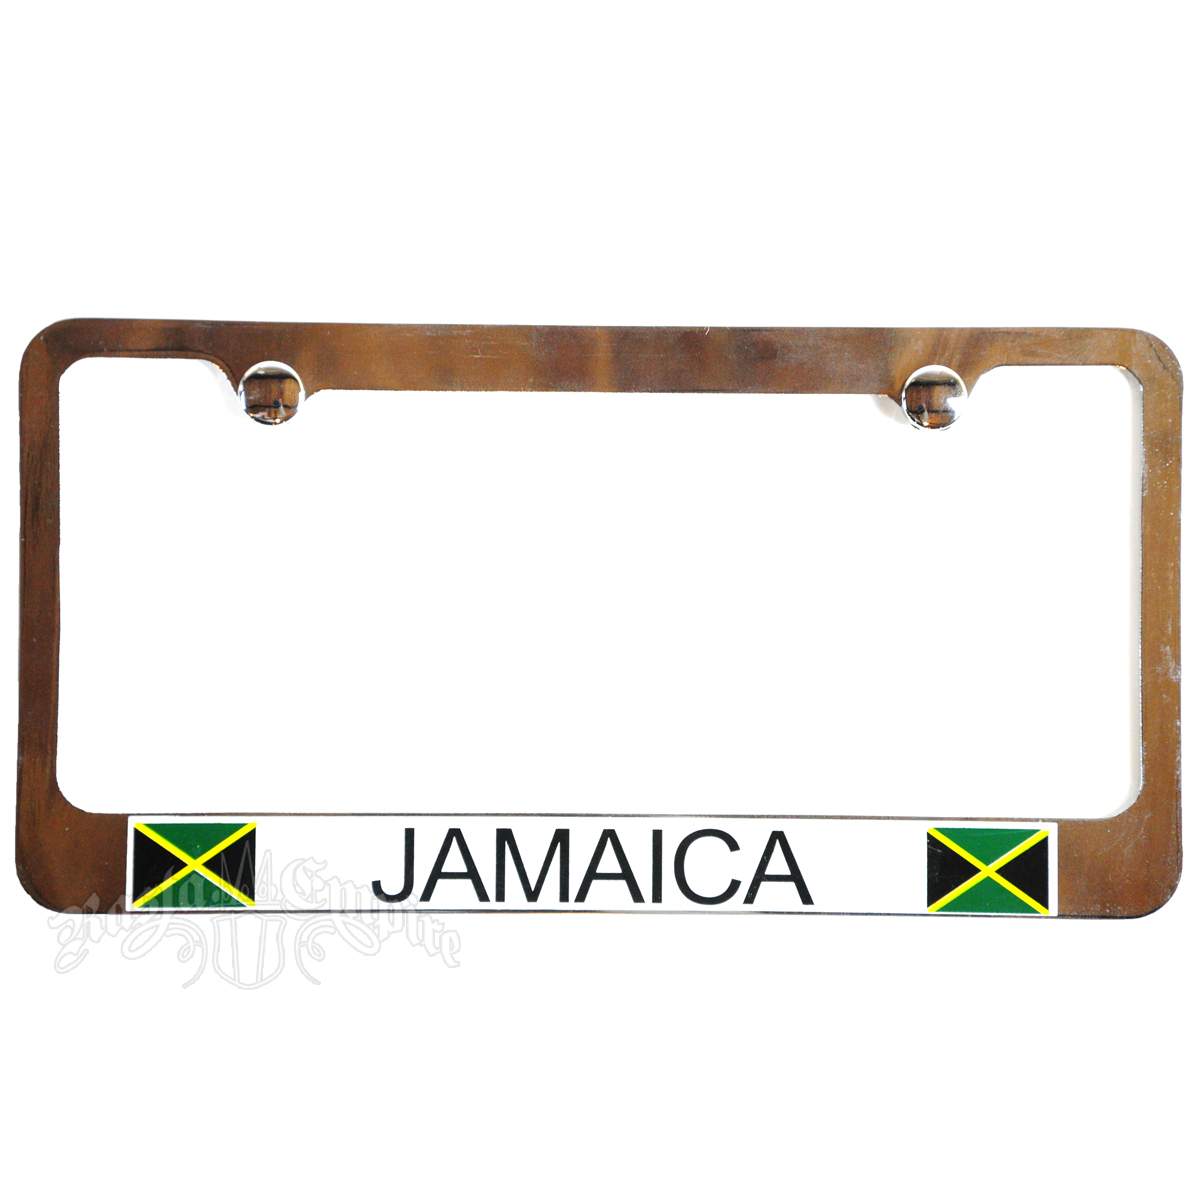 Jamaican Chrome License Plate Frame with White Border